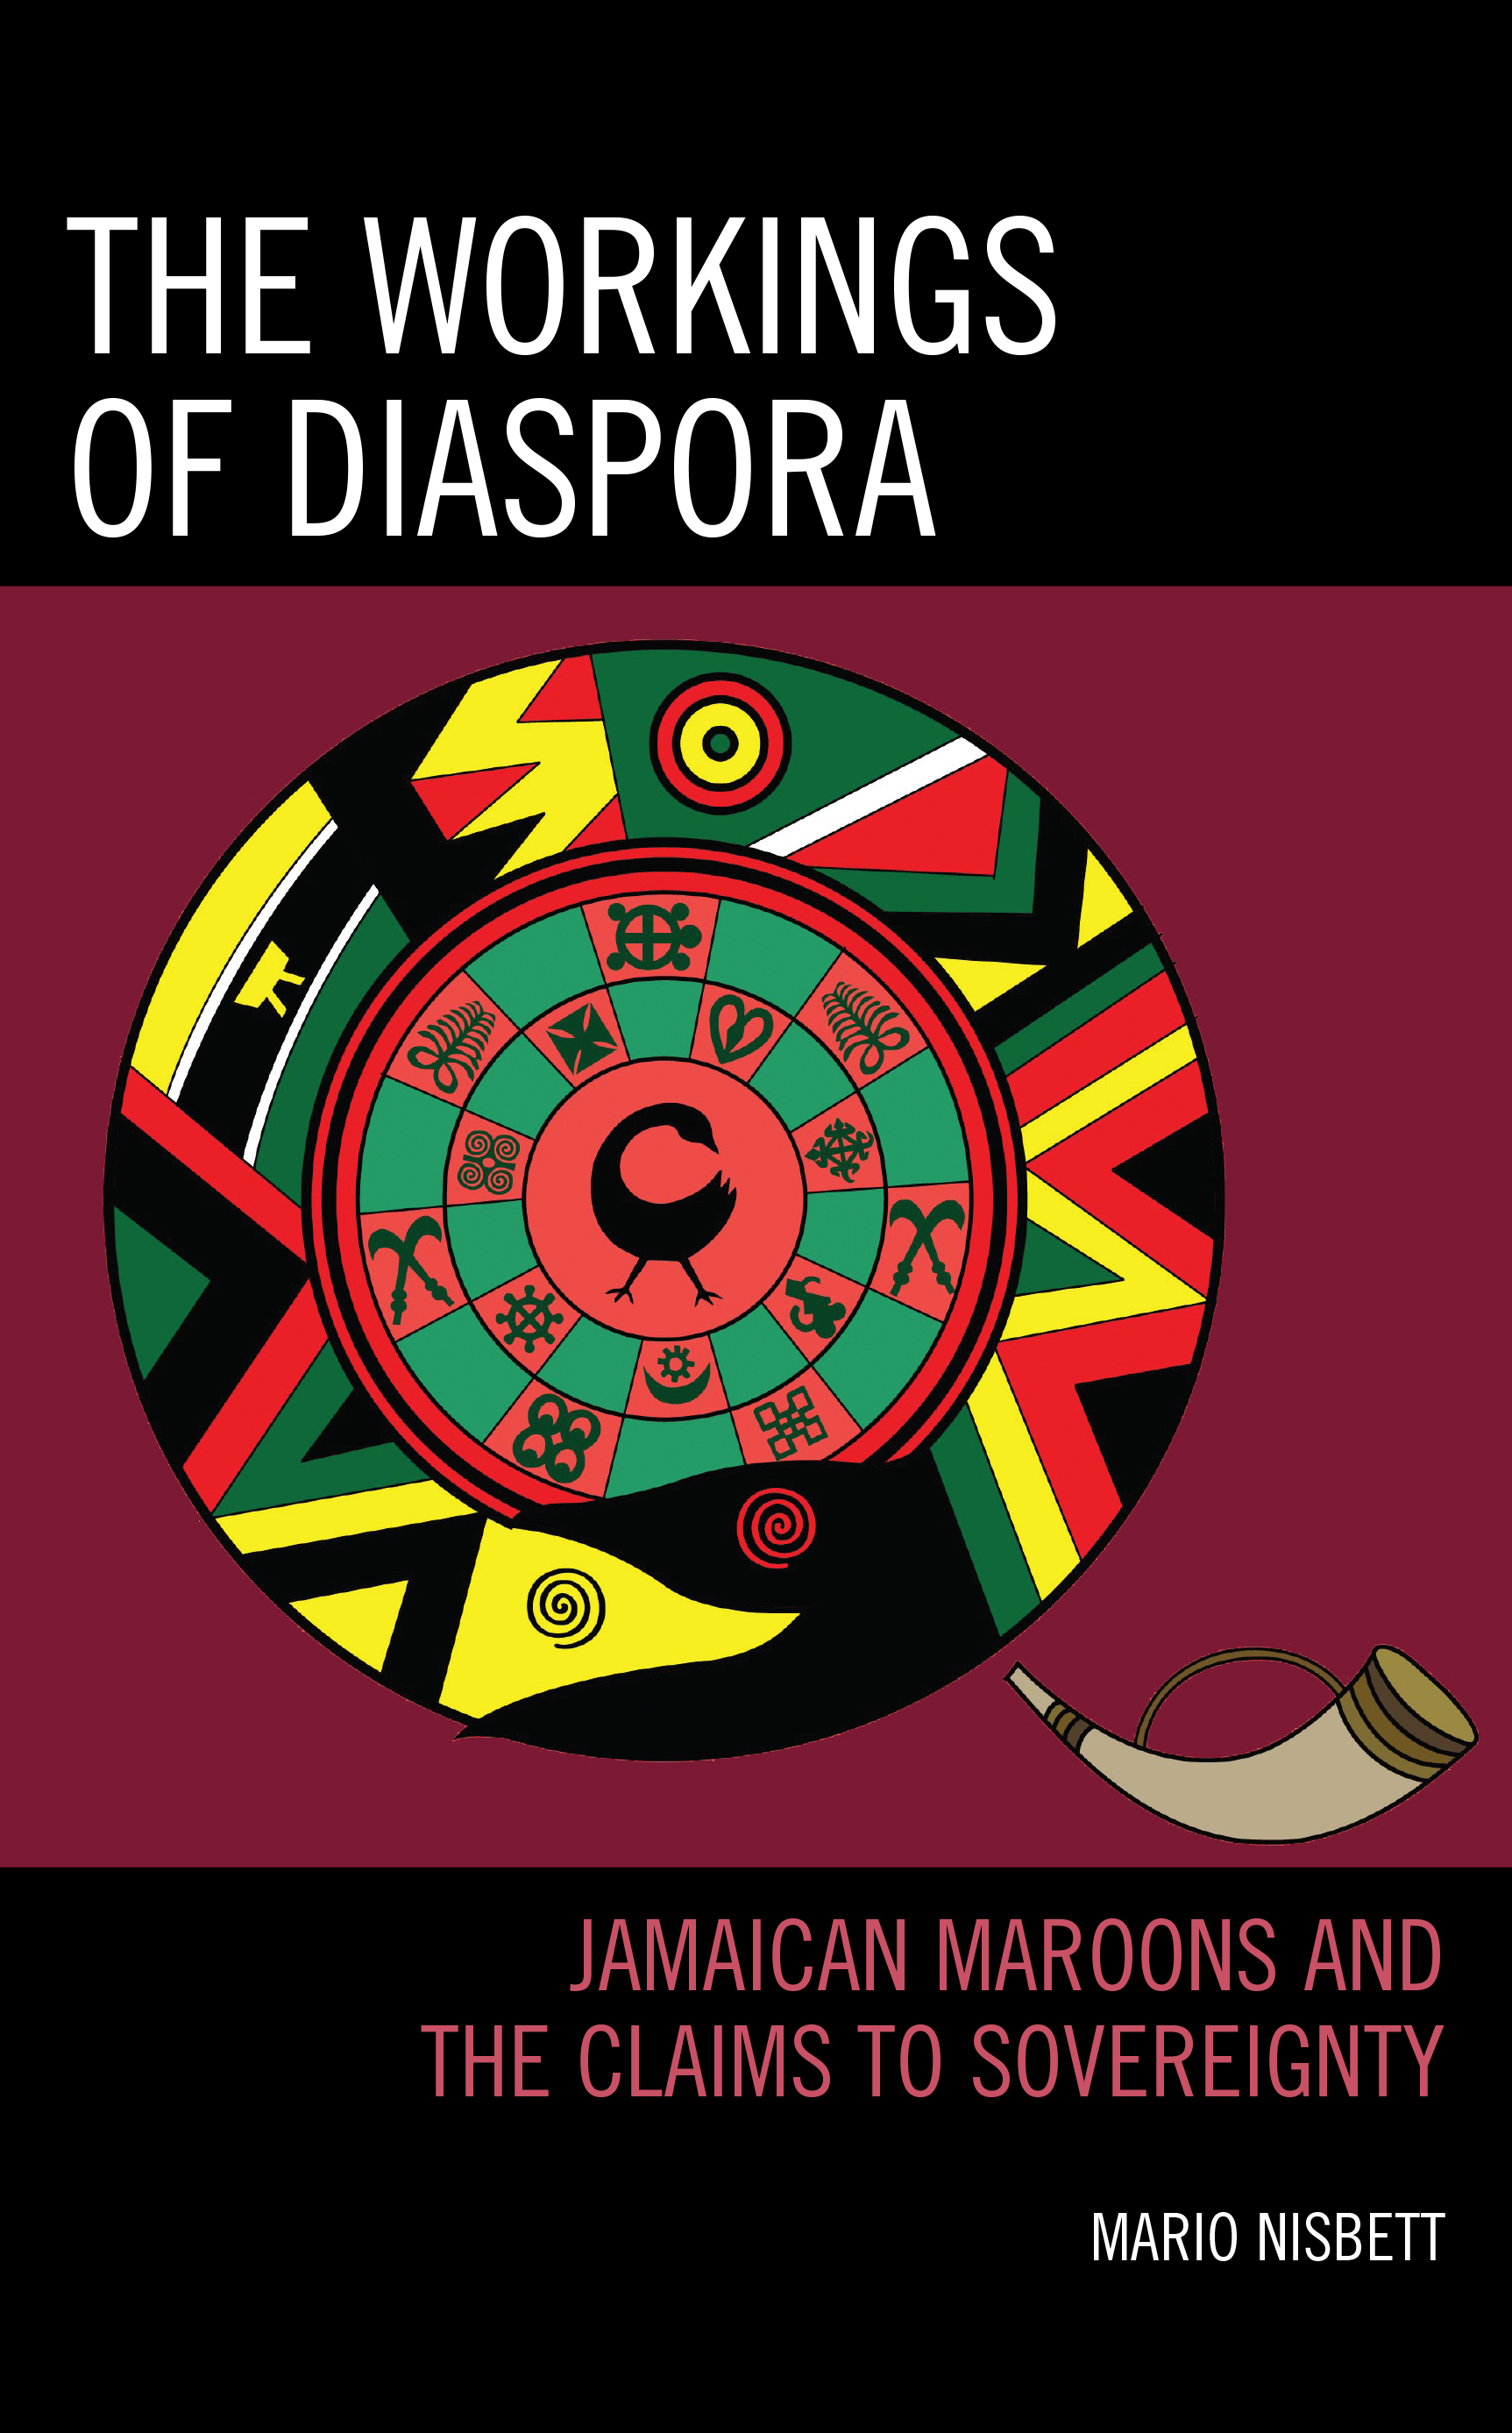 The Workings of Diaspora: Jamaican Maroons and the Claims to Sovereignty